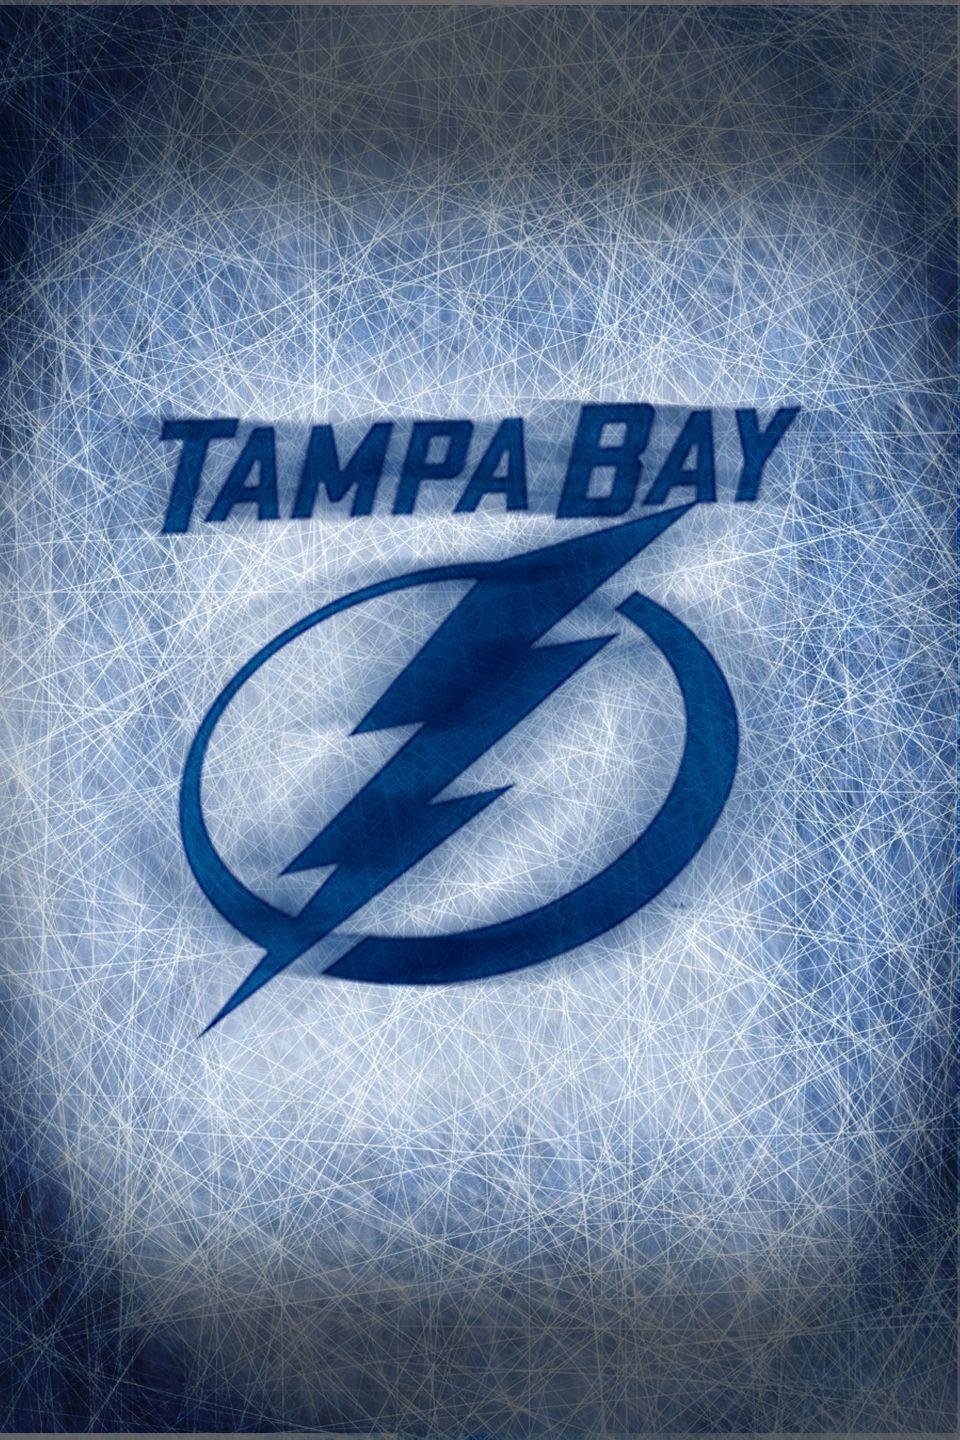 10 Best Tampa Bay Lightning Iphone Wallpaper FULL HD 1920×1080 For PC